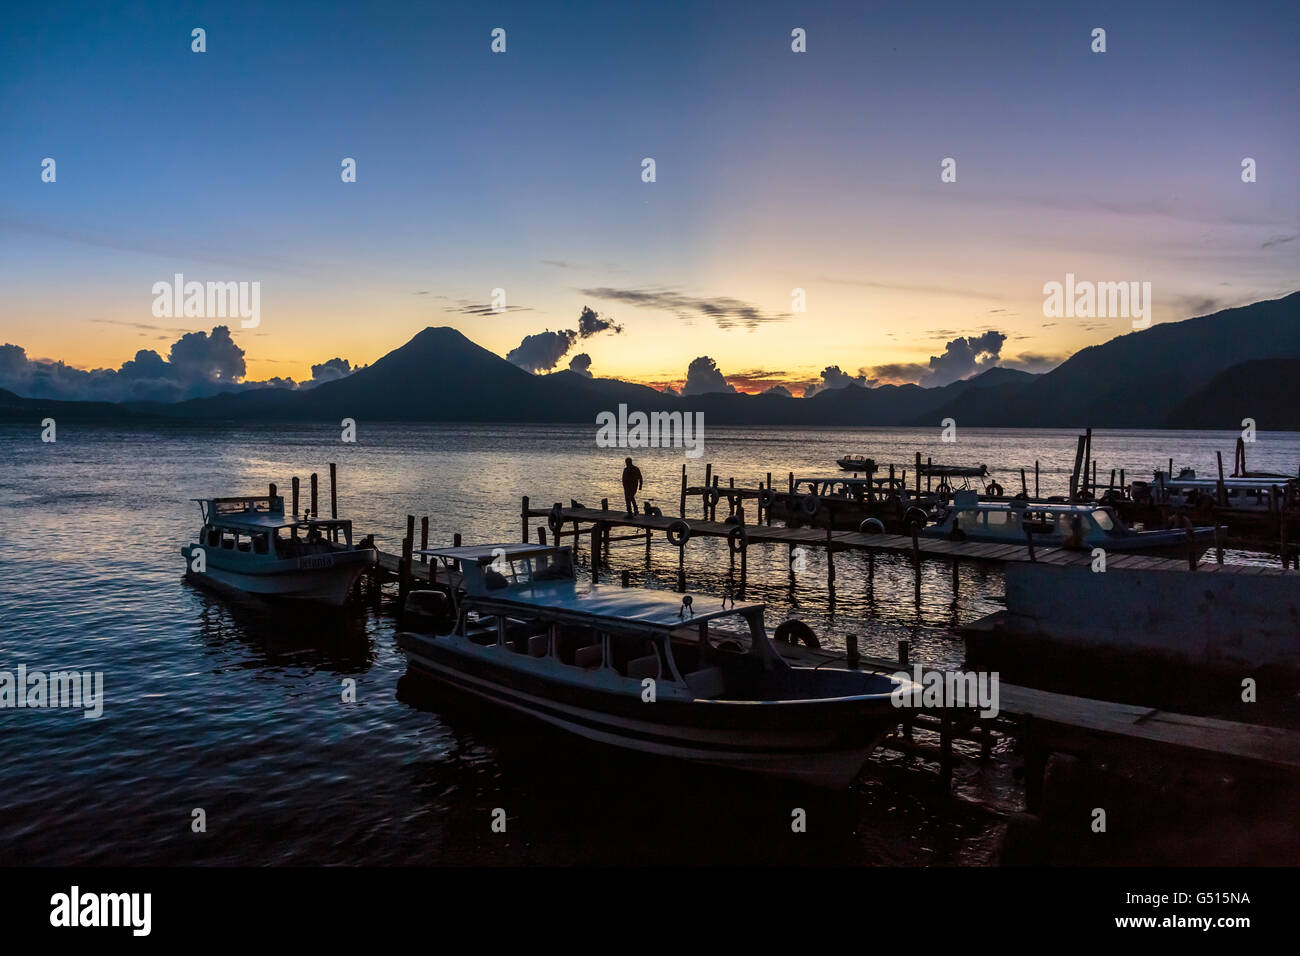 The sun sets over Lago de Atitlan in Guatemala, and tourists and locals gather at the docks in Panajachel to watch dusk settle. Stock Photo